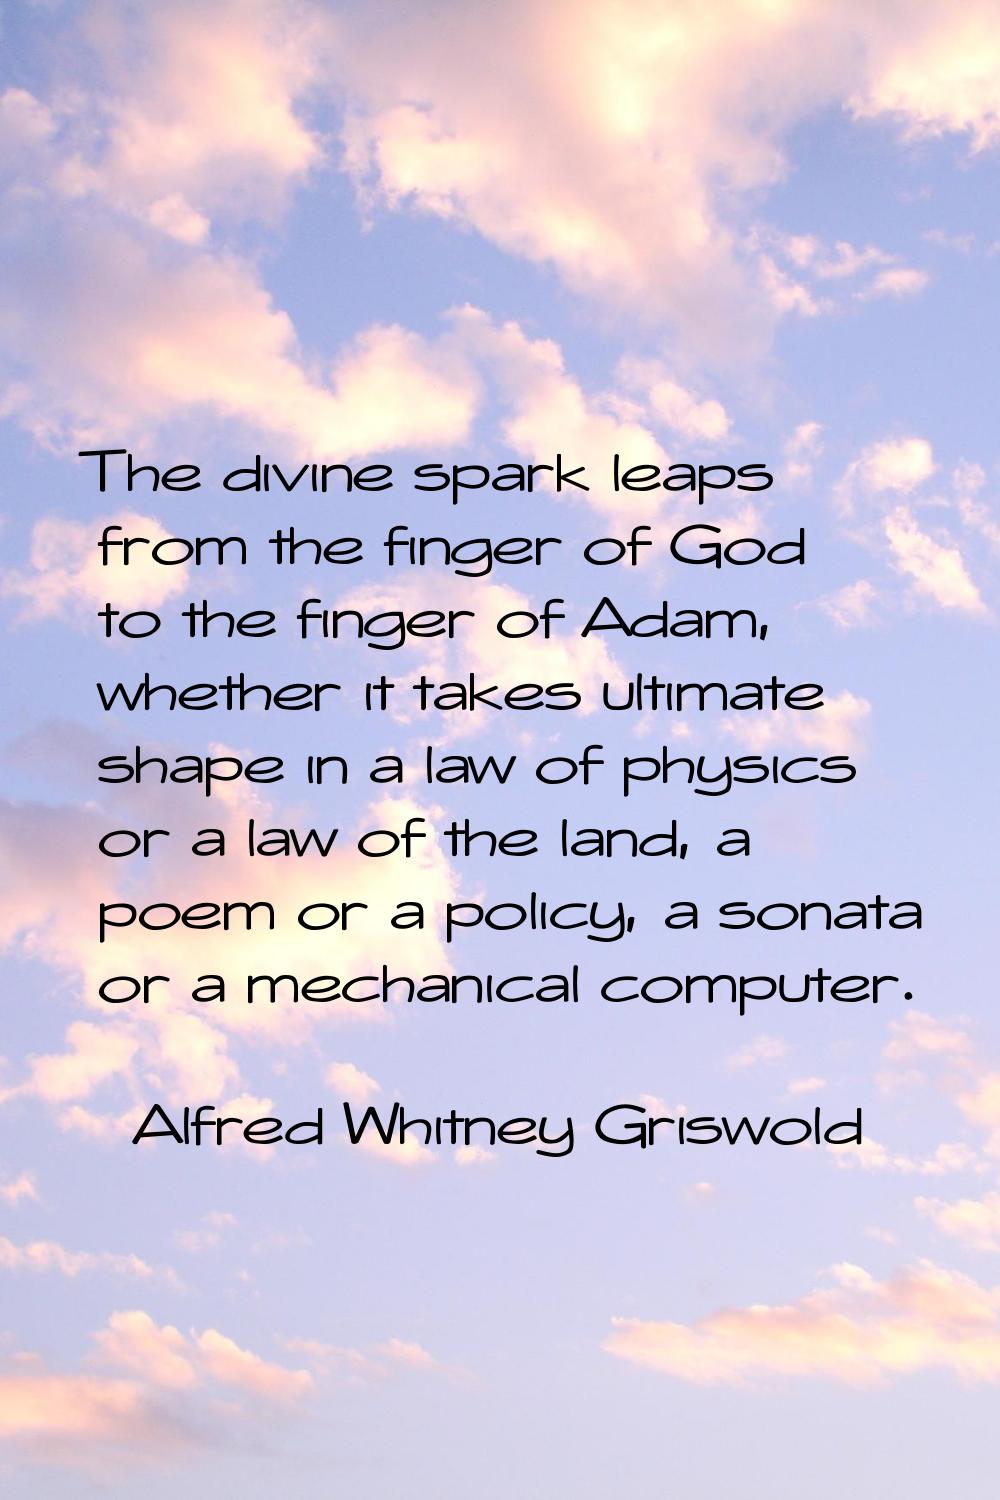 The divine spark leaps from the finger of God to the finger of Adam, whether it takes ultimate shap